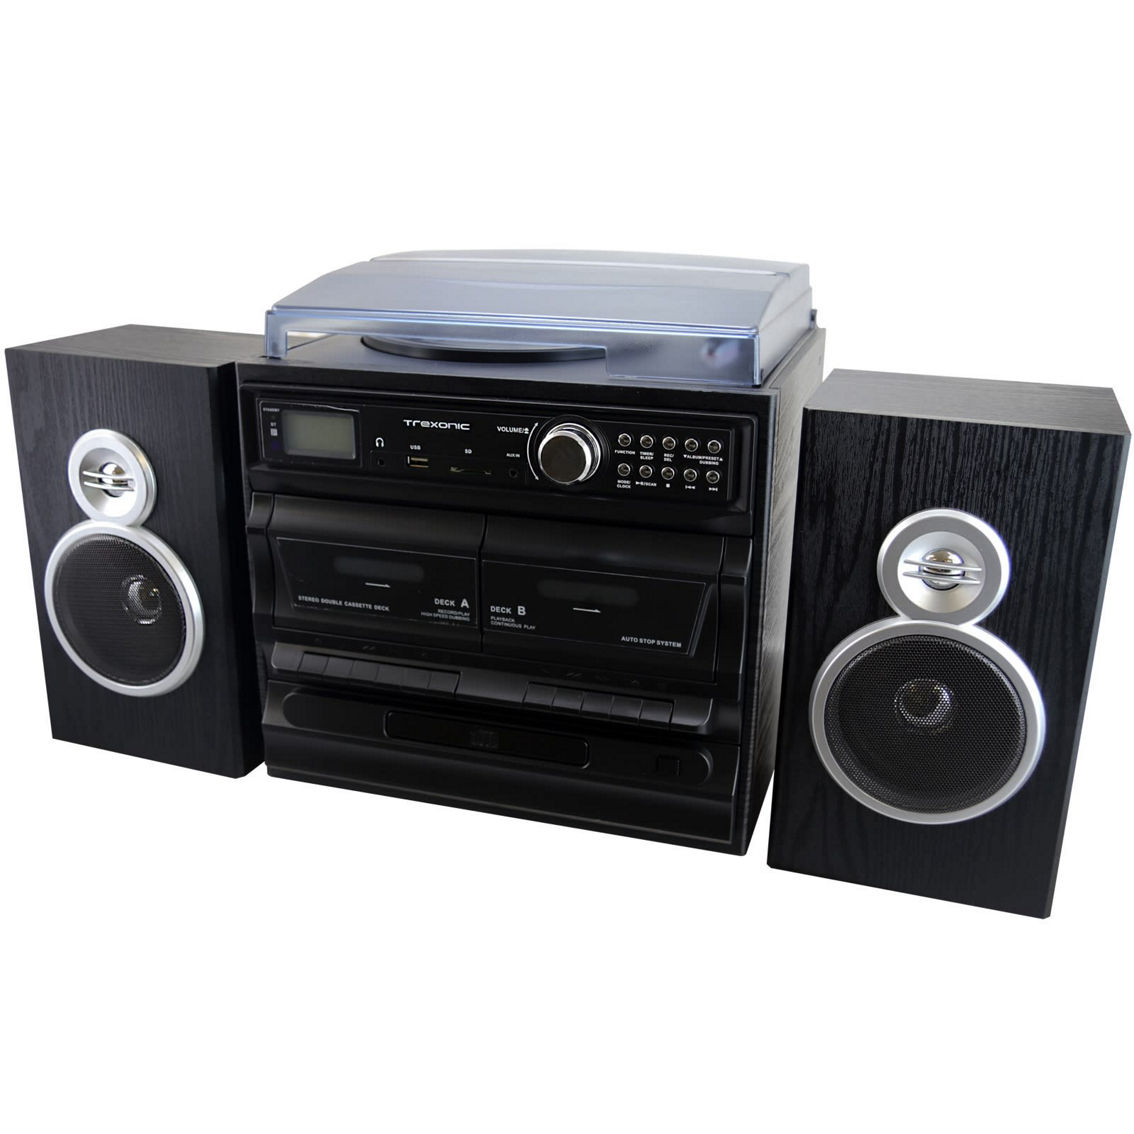 Trexonic 3-Speed Vinyl Turntable Home Stereo System with CD Player, Dual Cassett - Image 3 of 5